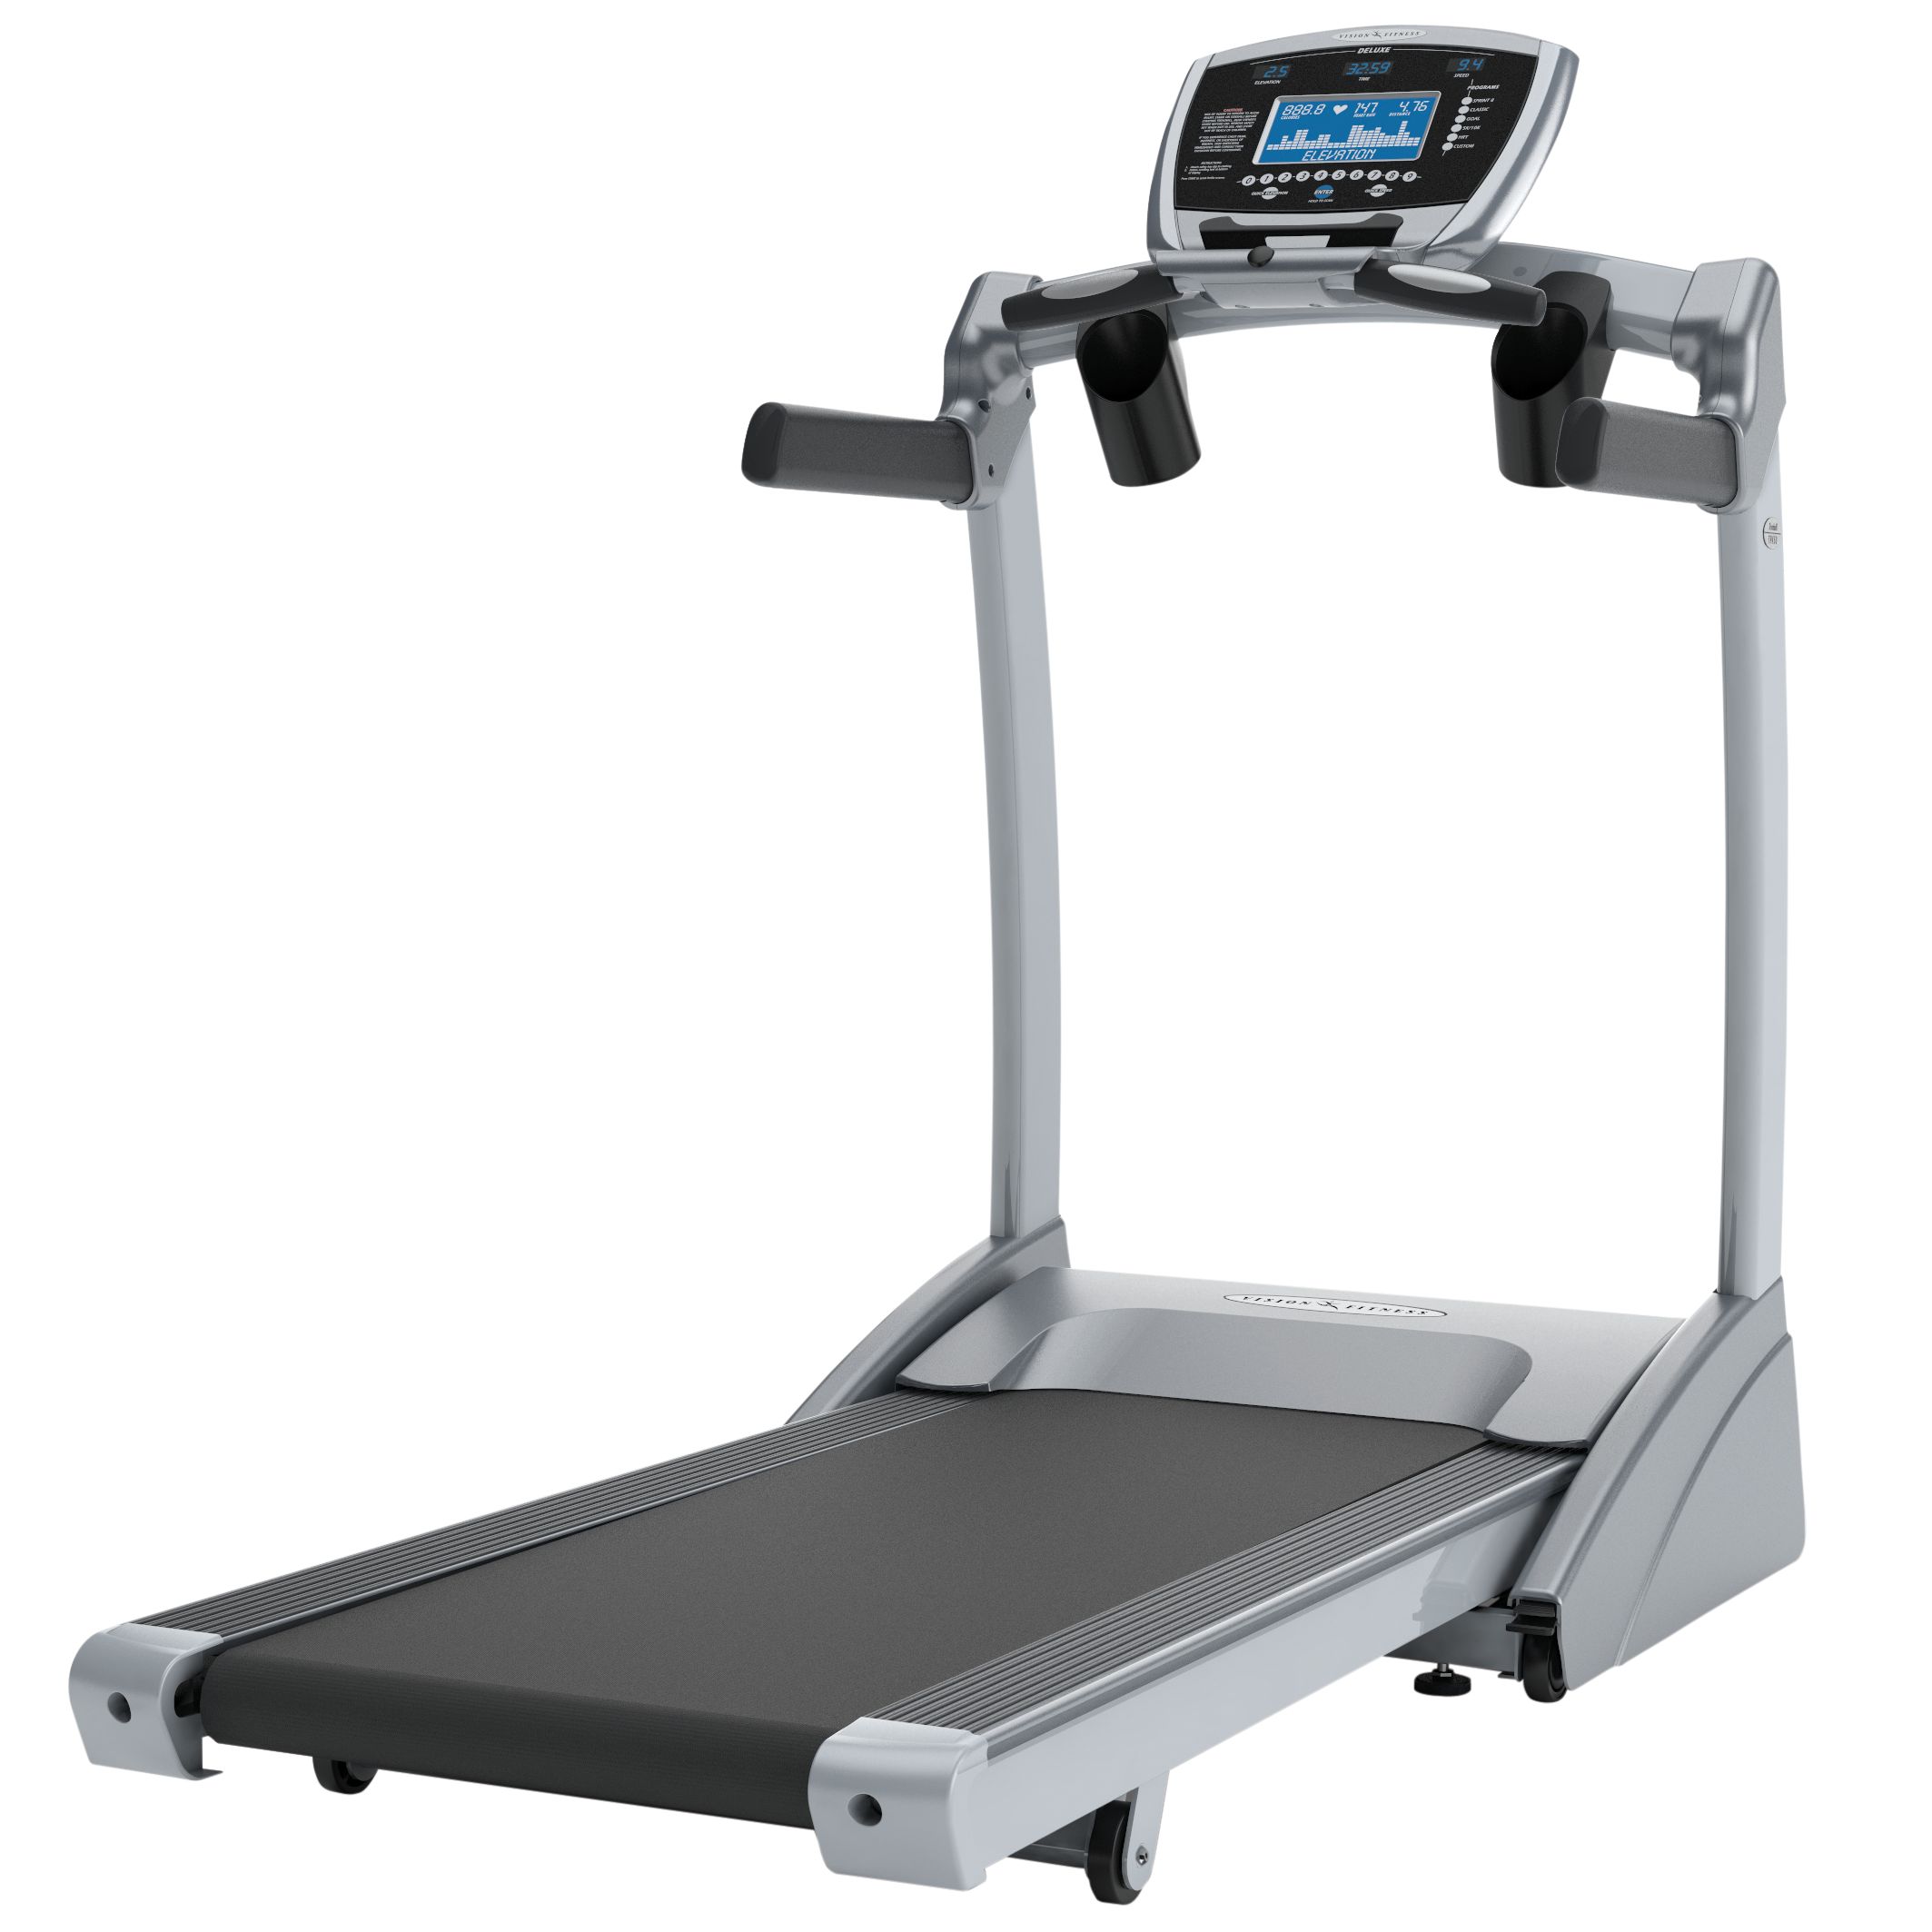 Vision Fitness T9250 Folding Treadmill with Premier Console at John Lewis